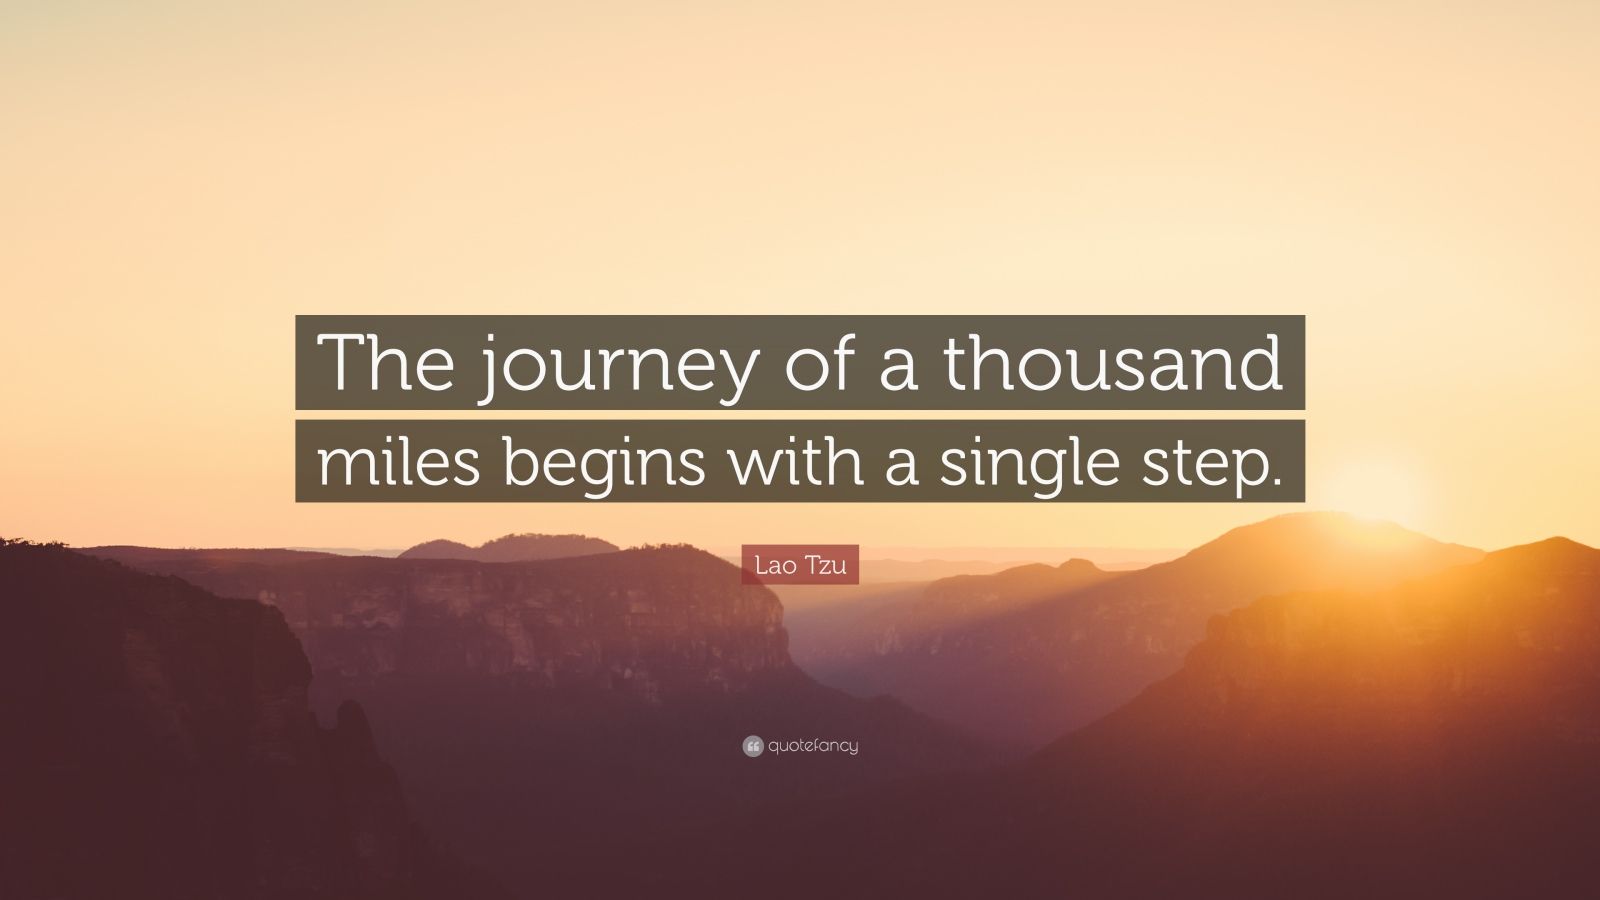 Lao Tzu Quote: “The journey of a thousand miles begins with a single ...